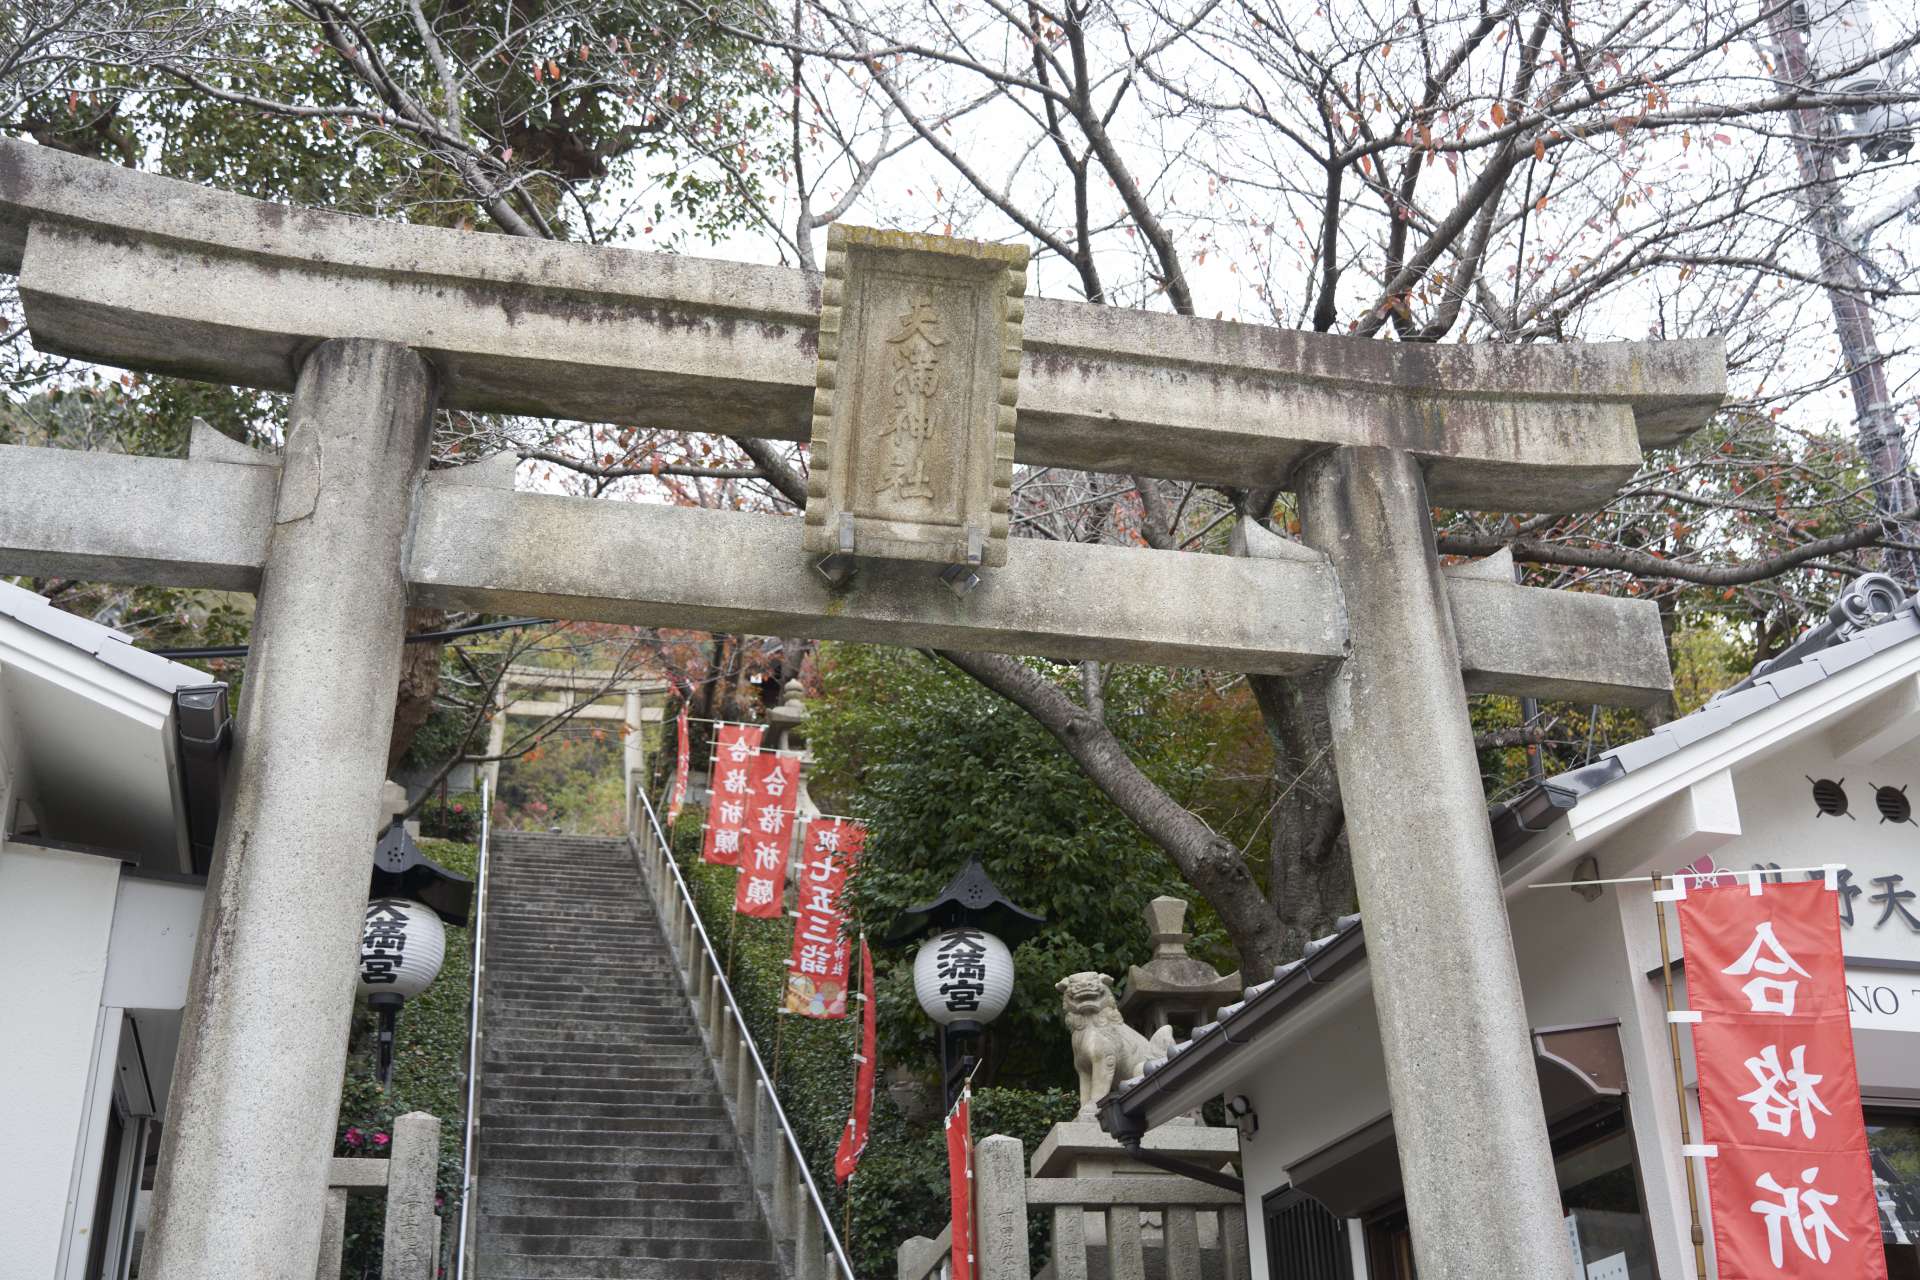 Nearly 840 years have passed since the shrines founding by Taira no Kiyomori. It continues to protect Kobe from its high perch. 